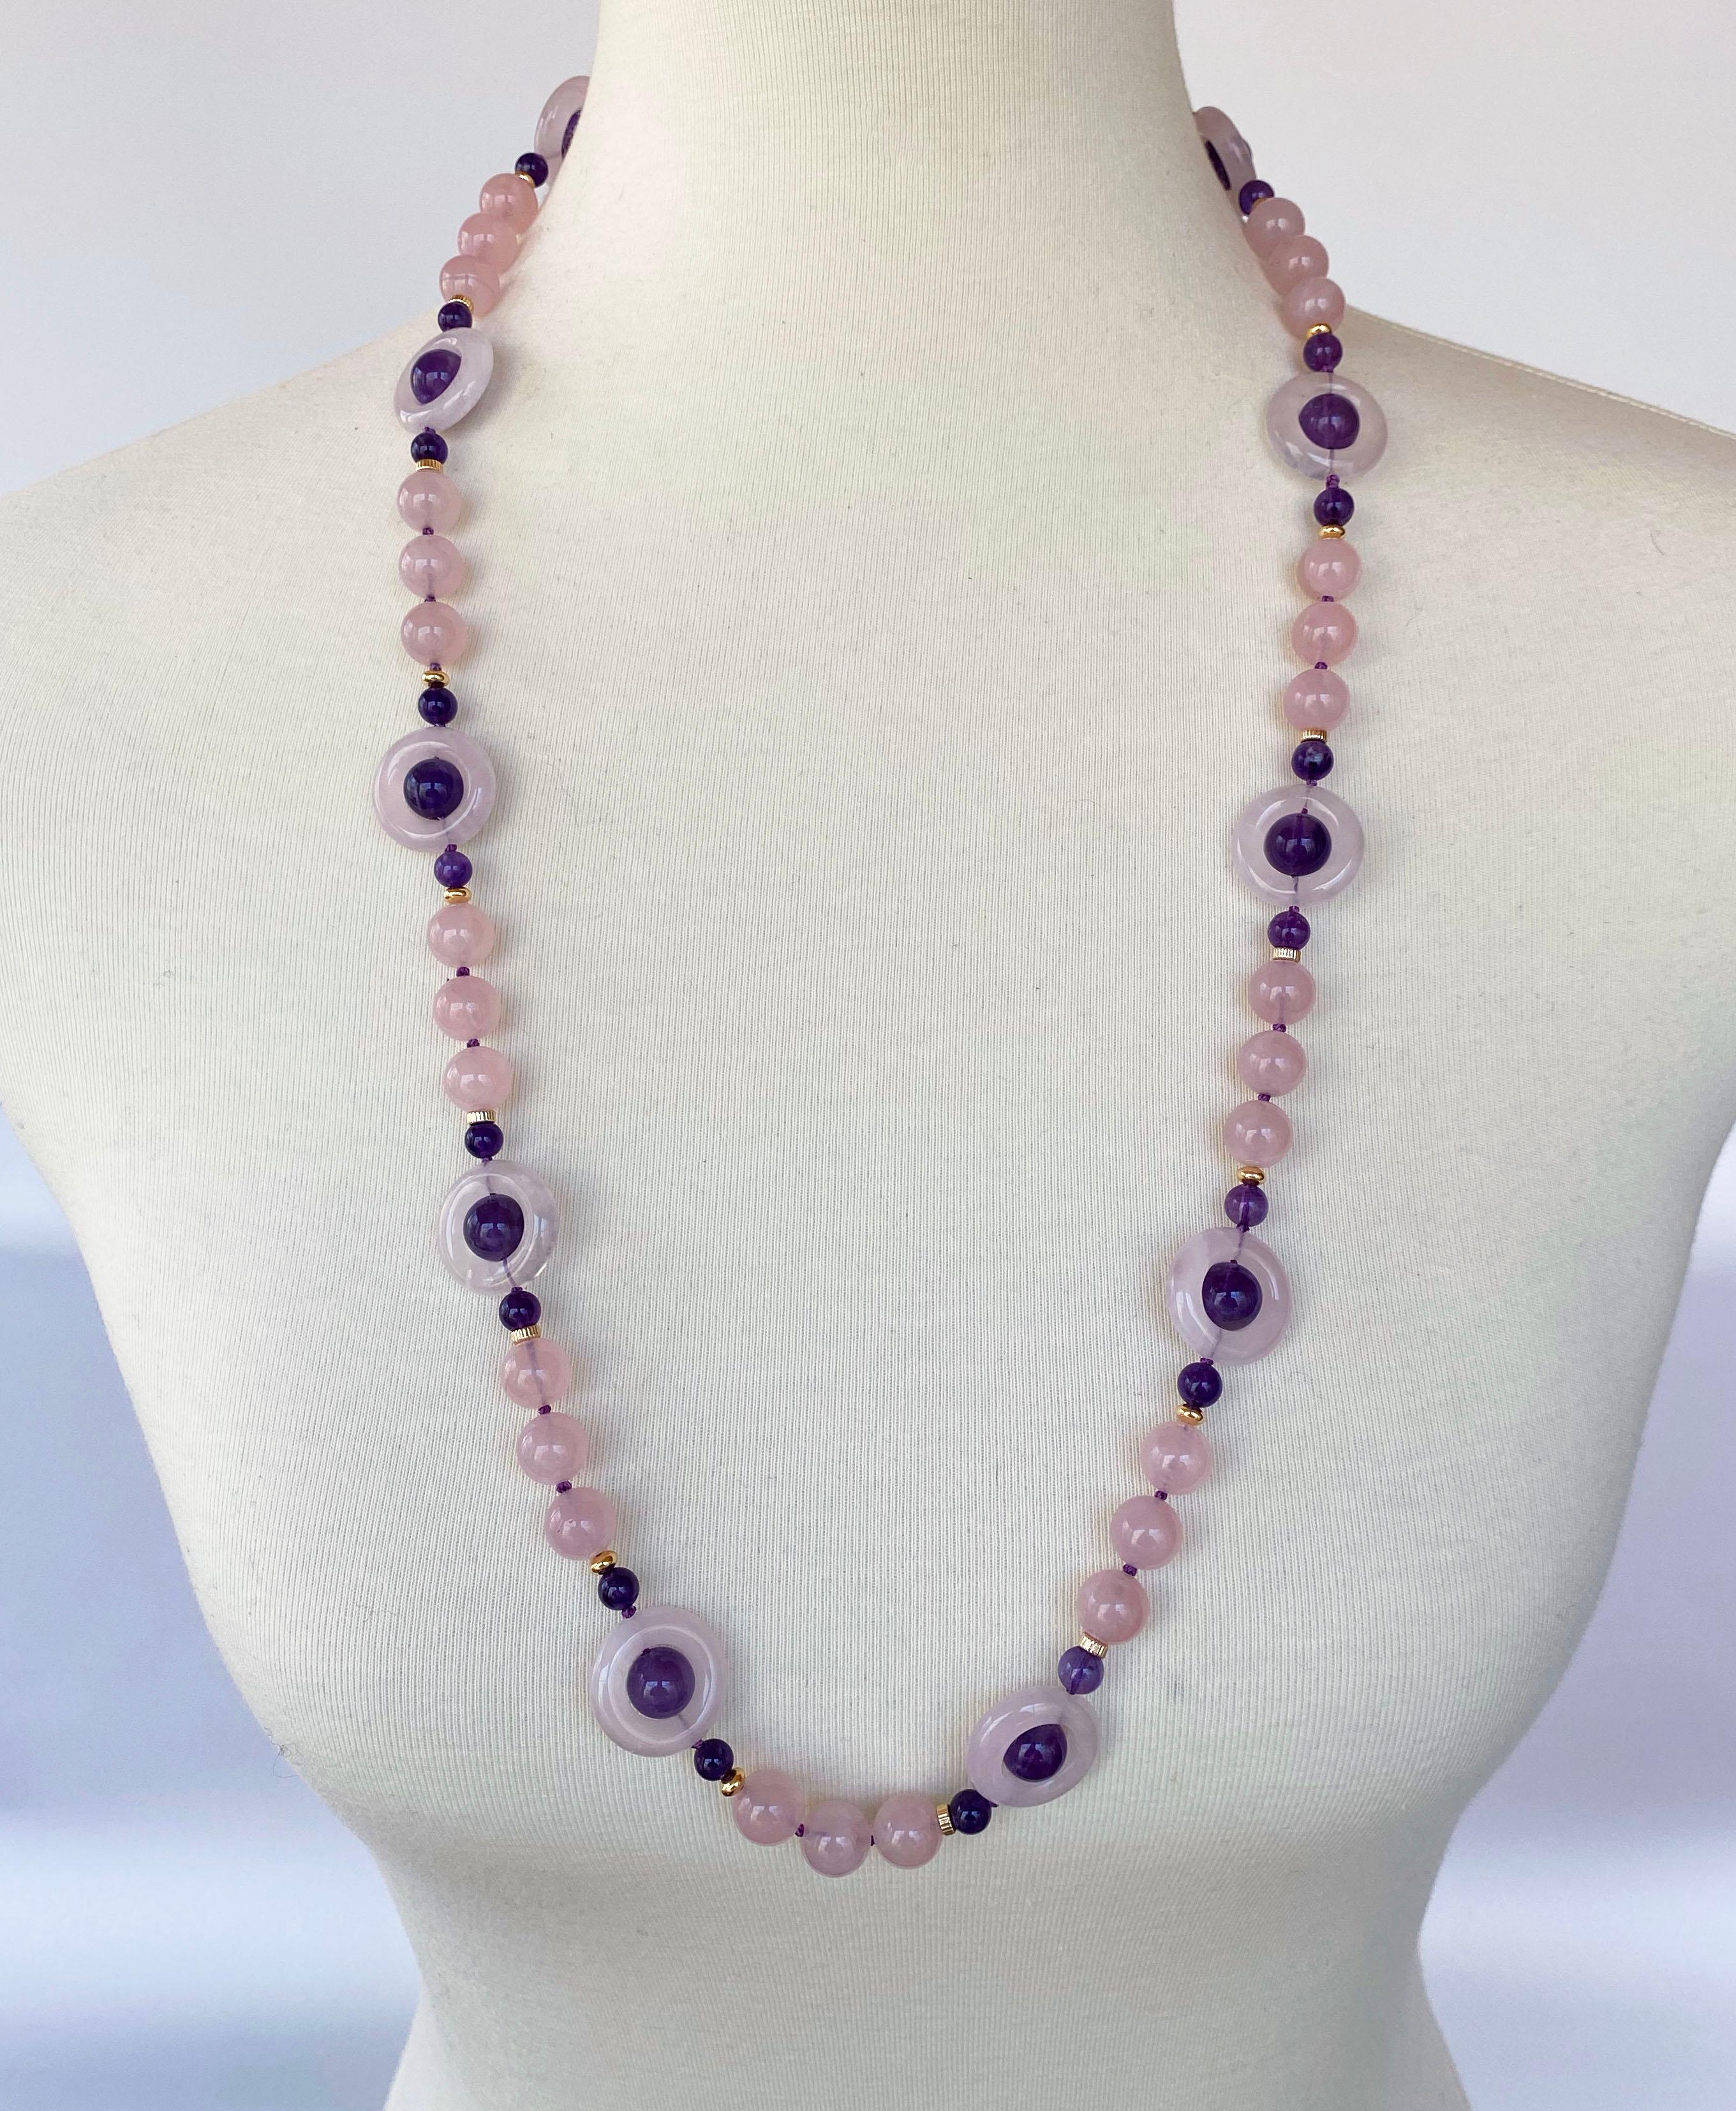 Gorgeous stone necklace by Marina J. This lovely piece is made using multi shaped Rose Quartz, Amethyst and 14k Gold Plated Silver Vermeil findings. Due to their translucent nature, the Amethysts and Rose Quartz radiate wonderful hues of color when